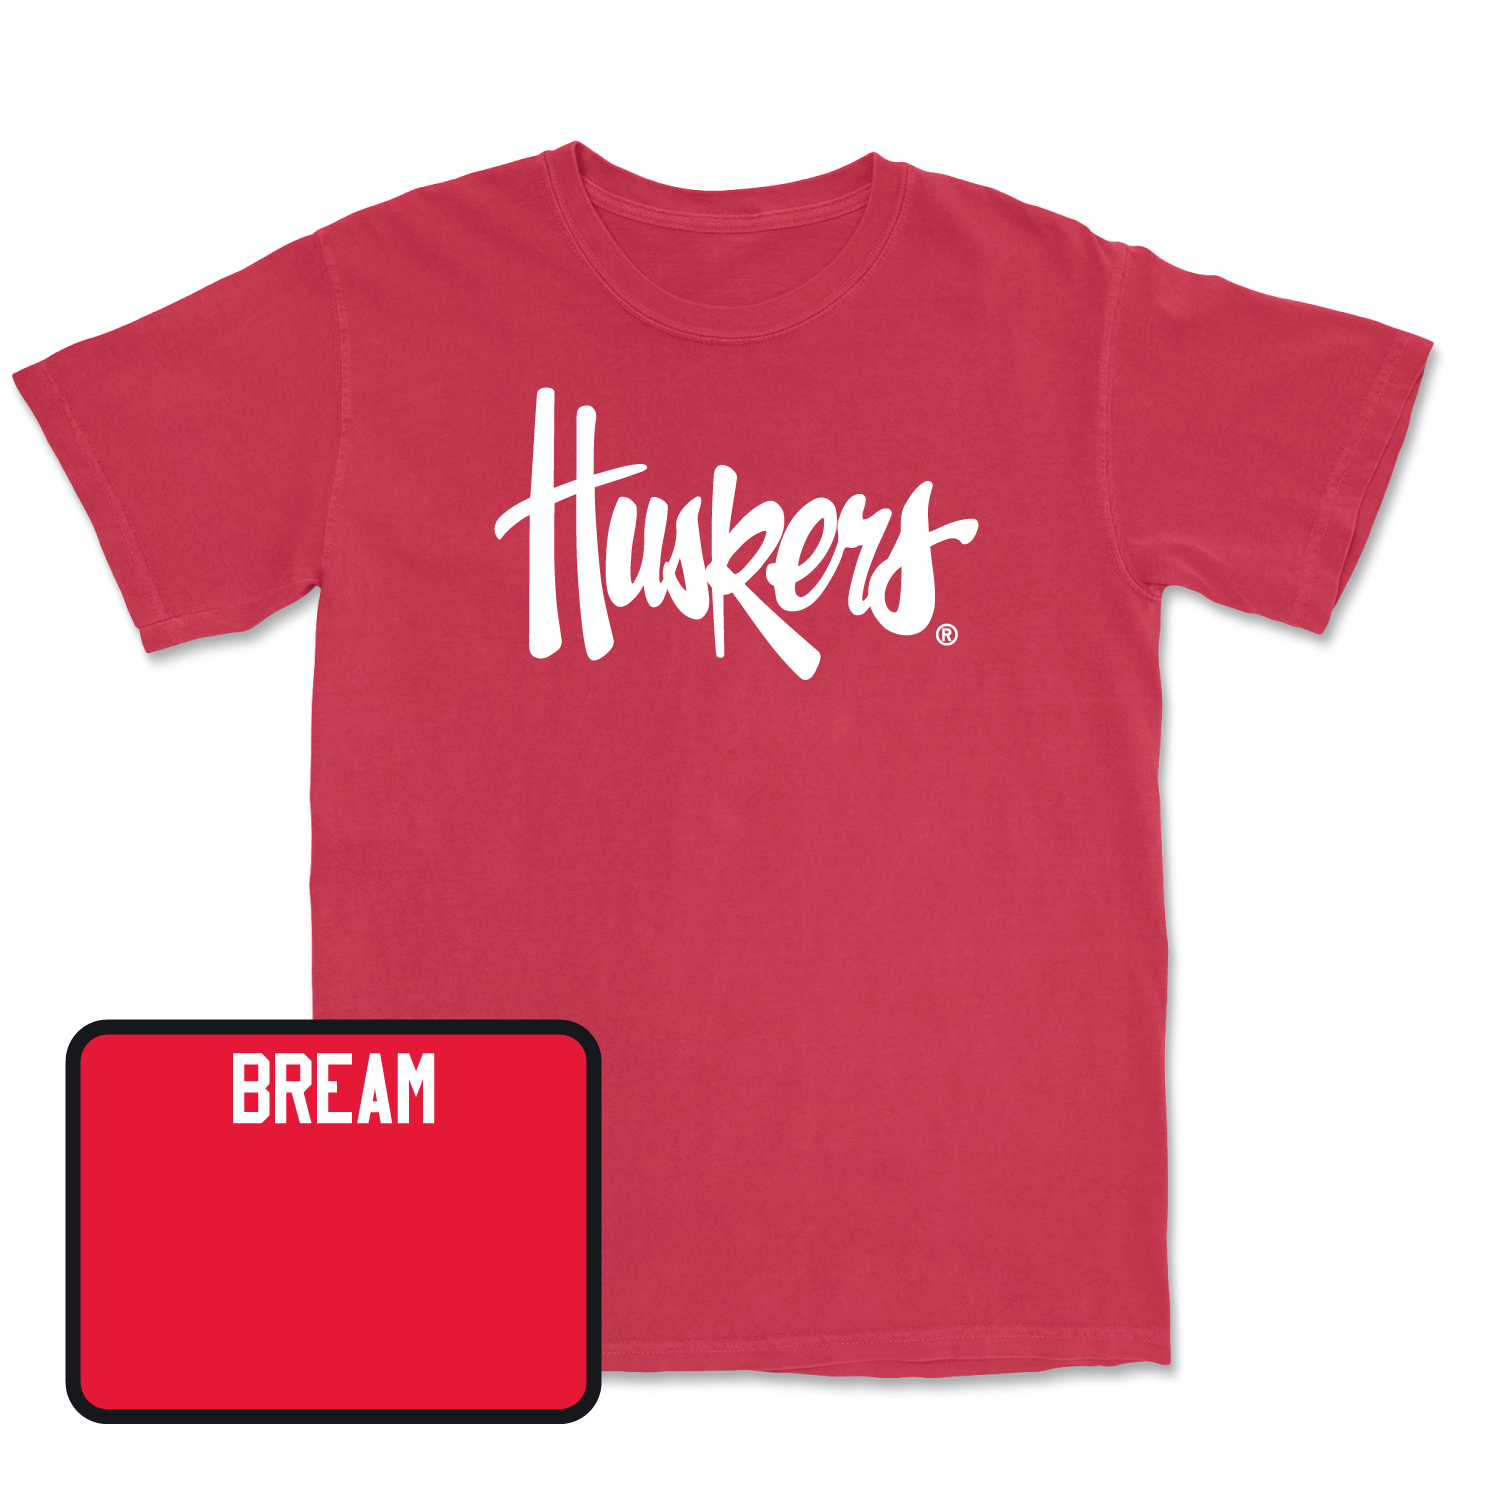 Red Women's Golf Huskers Tee X-Large / Brooke Bream